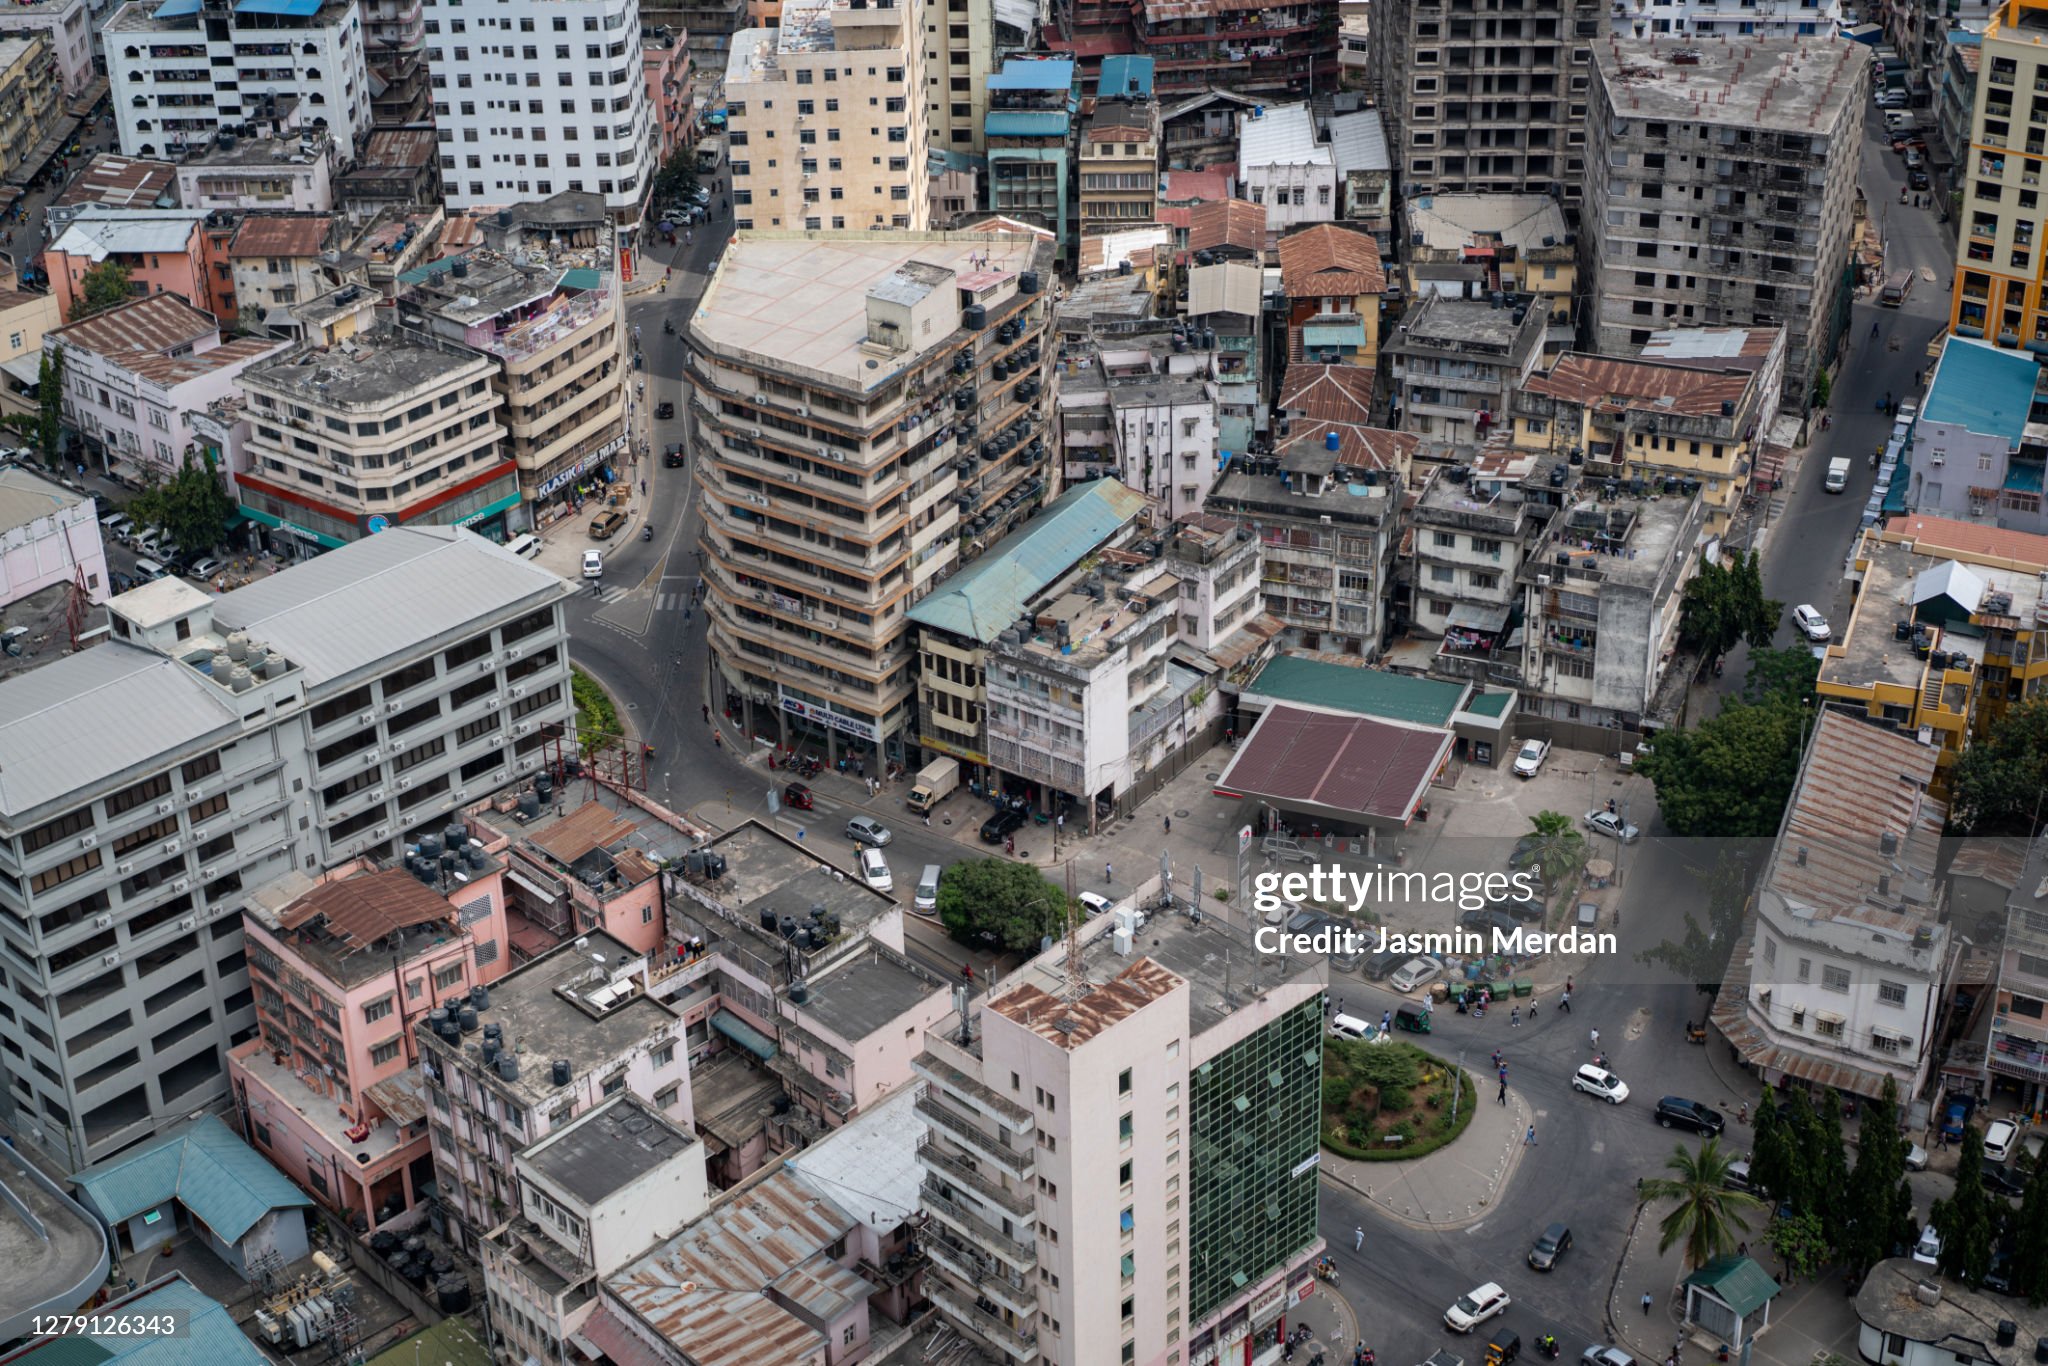 Dar es Salaam Business District Cityscape High Angle View : Stock Photo